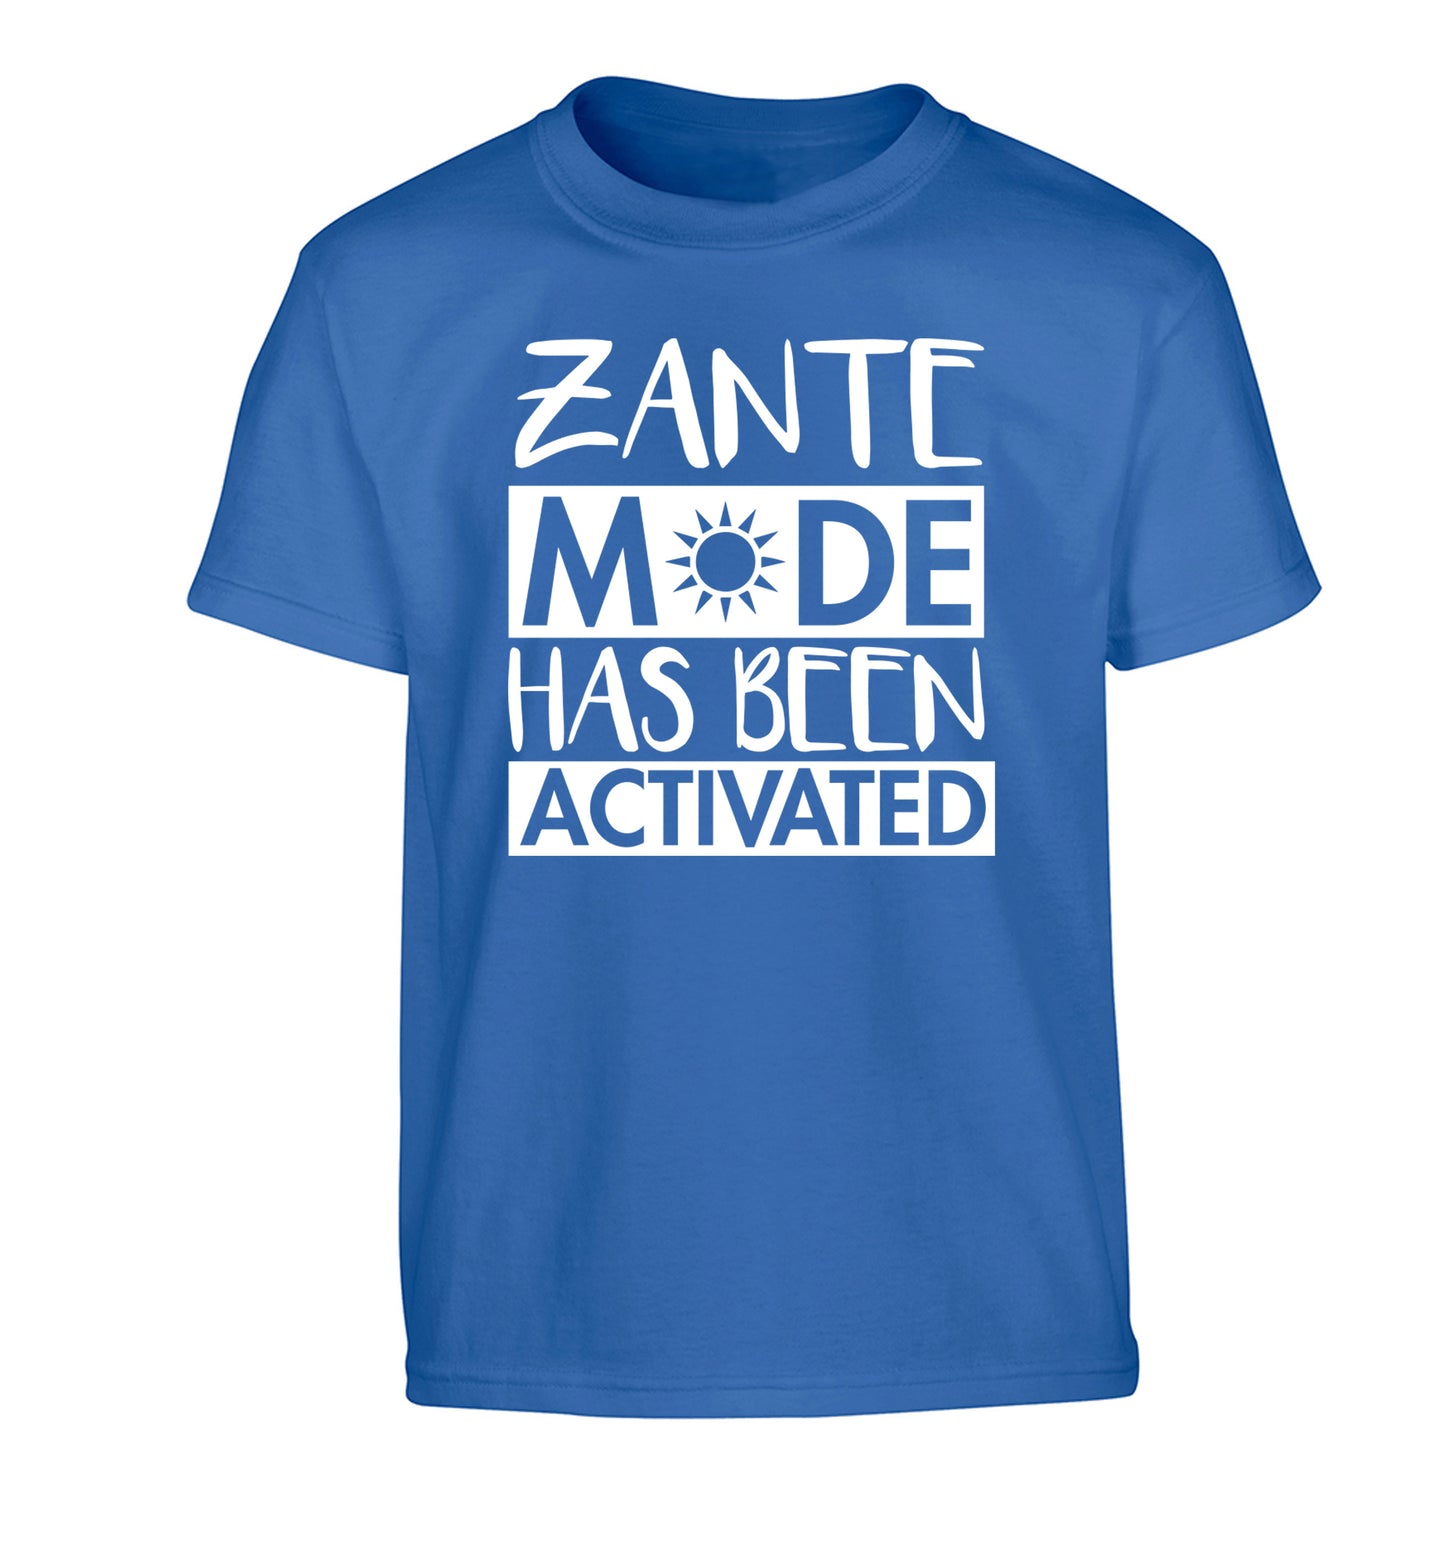 Zante mode has been activated Children's blue Tshirt 12-13 Years